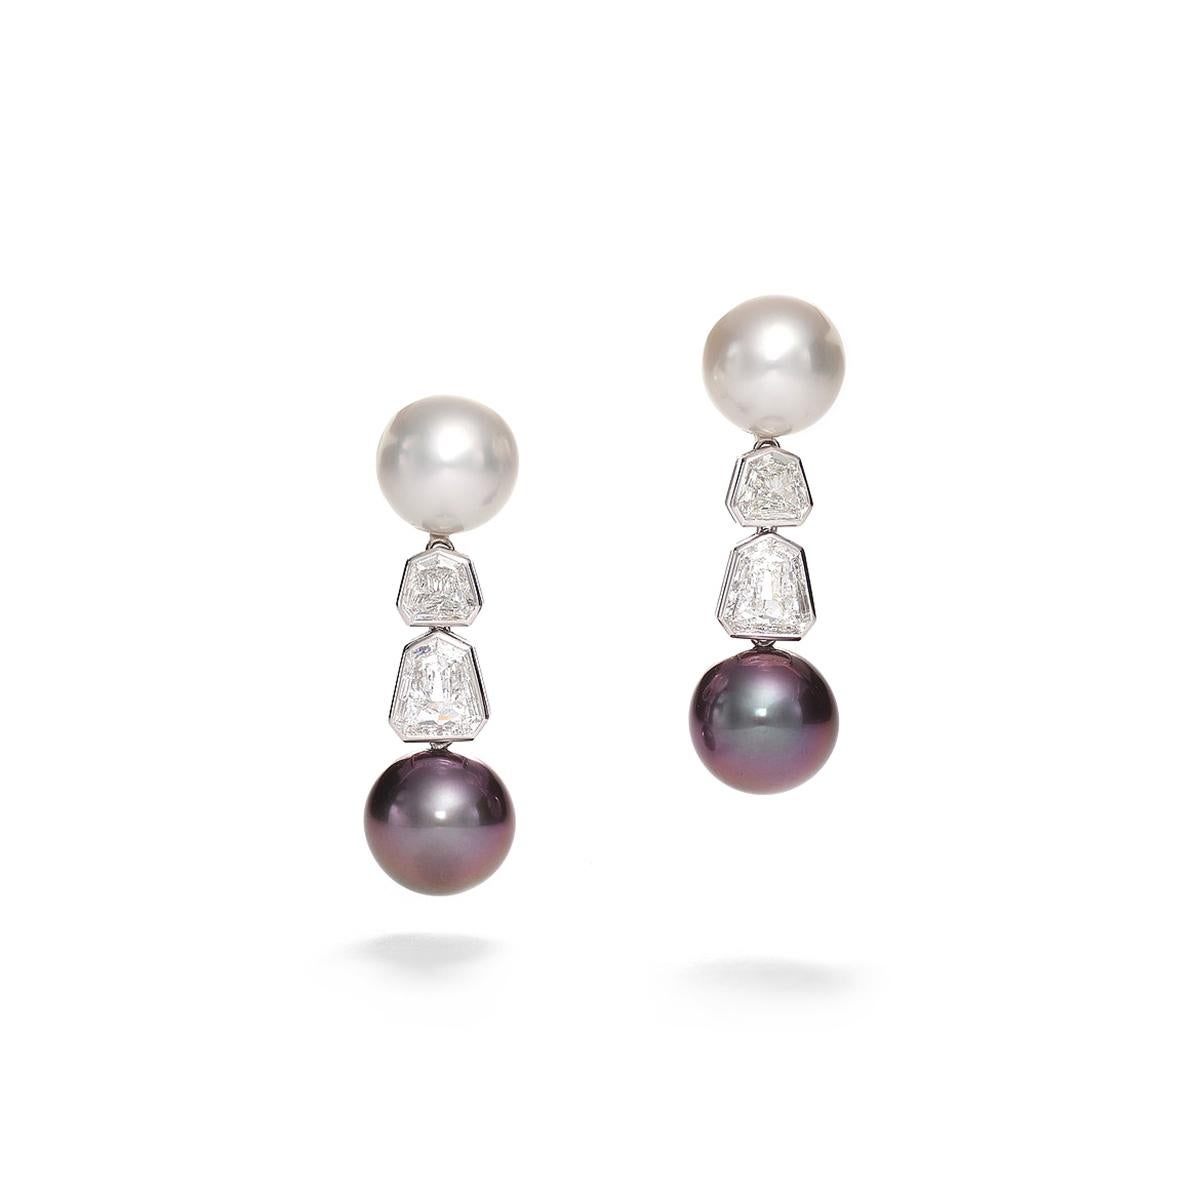 Earrings in 18kt white gold set with 2 South See pearls, 2 Thaiti pearls and            
4 shield cut diamonds 1.42 cts GVS and 2.78 cts DSI  